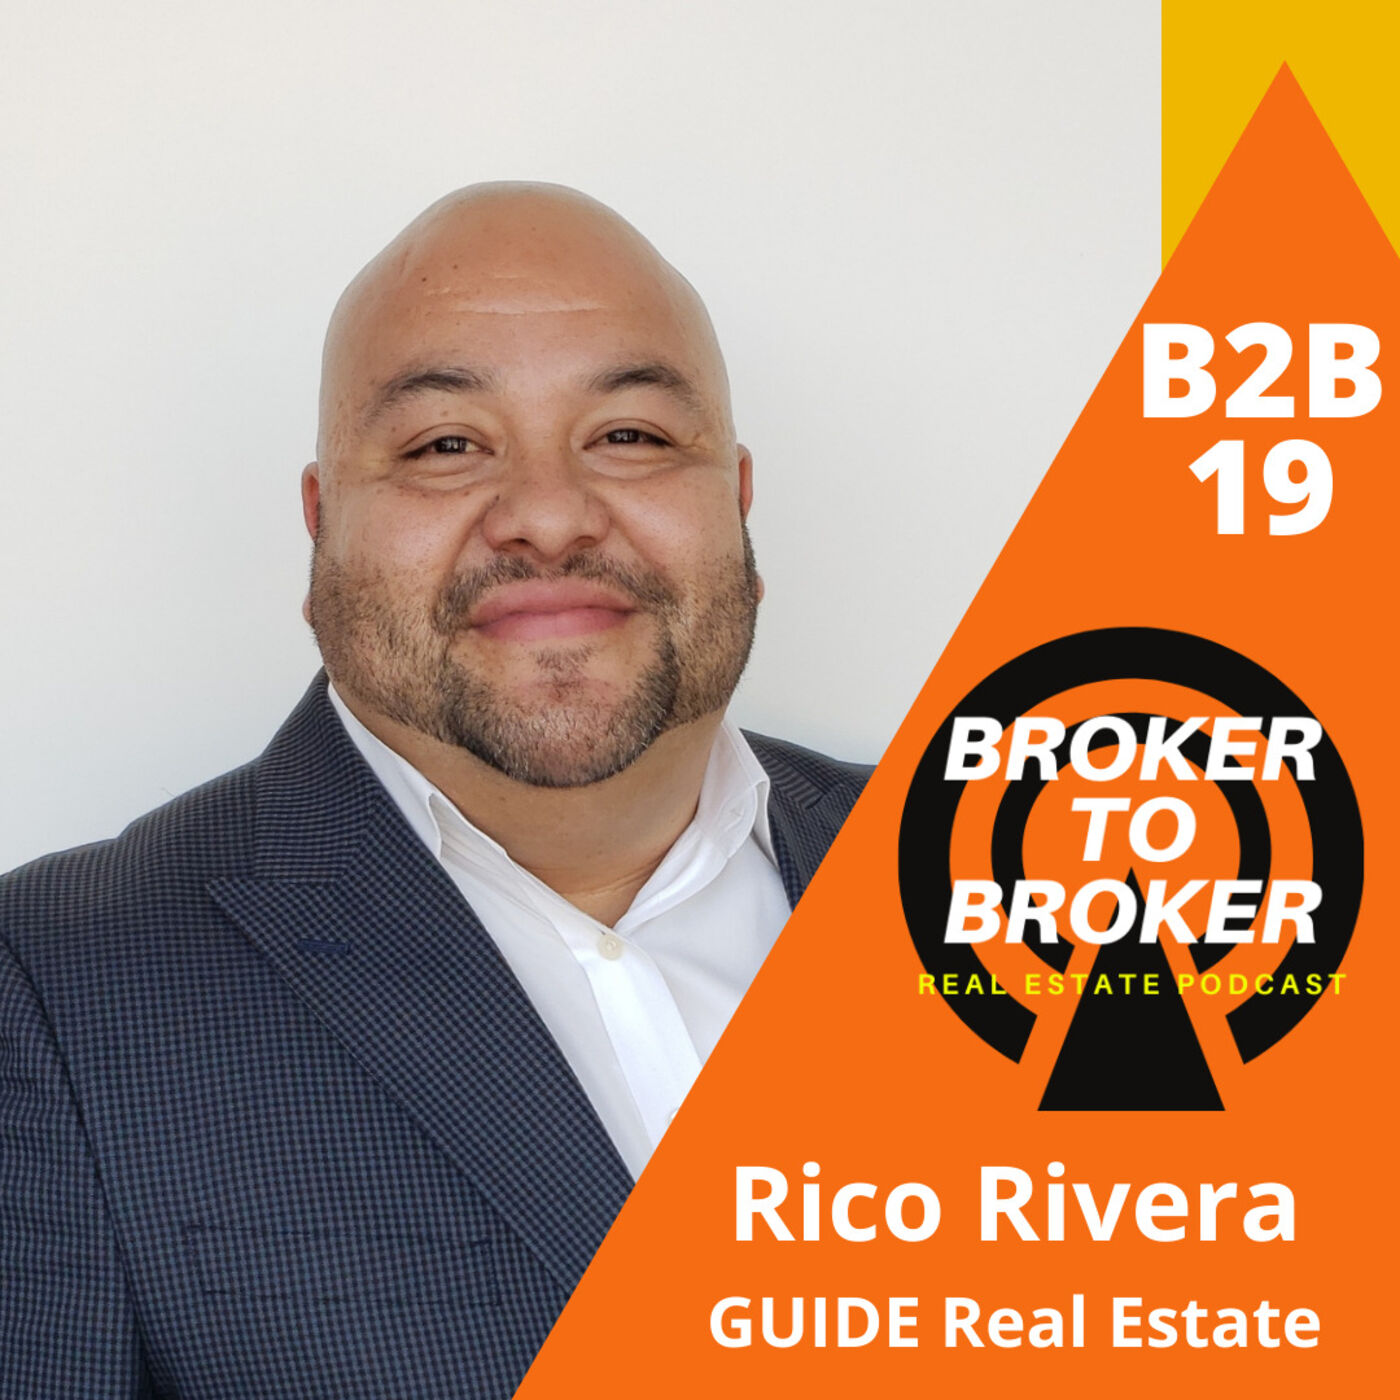 B2B 19: How to sell real estate during the pandemic